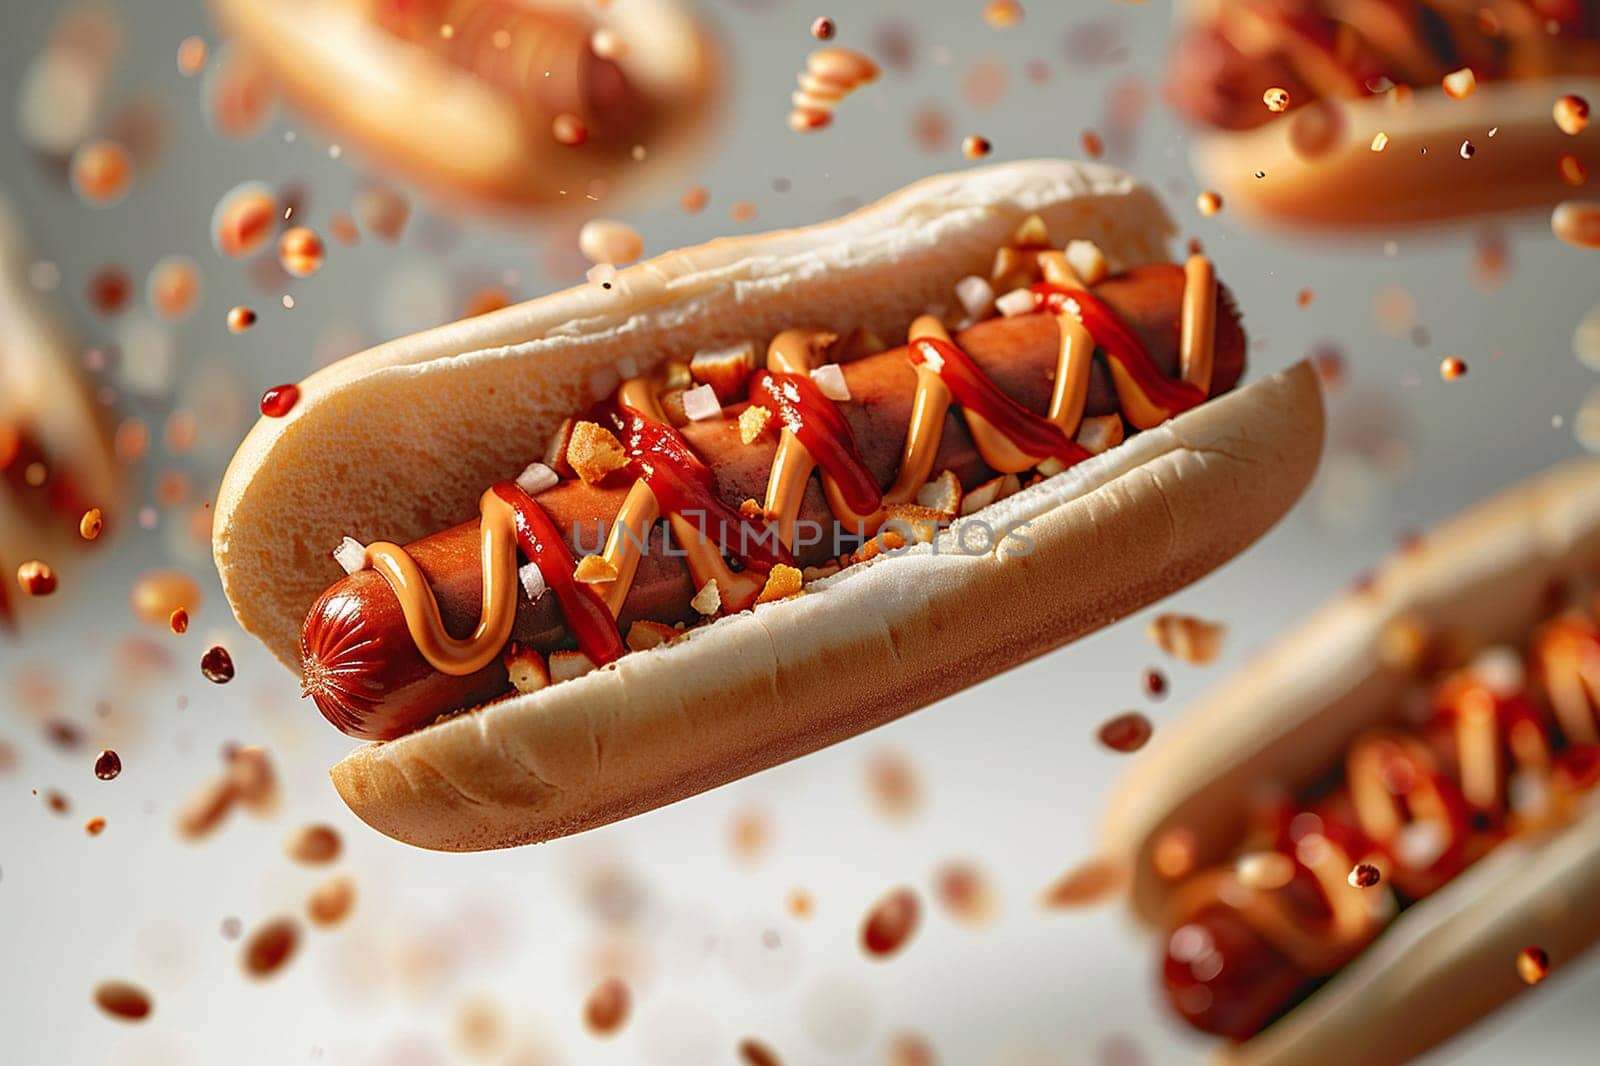 Delicious hot dogs in flight with drops of ketchup and mustard on a white background. Fast food concept.